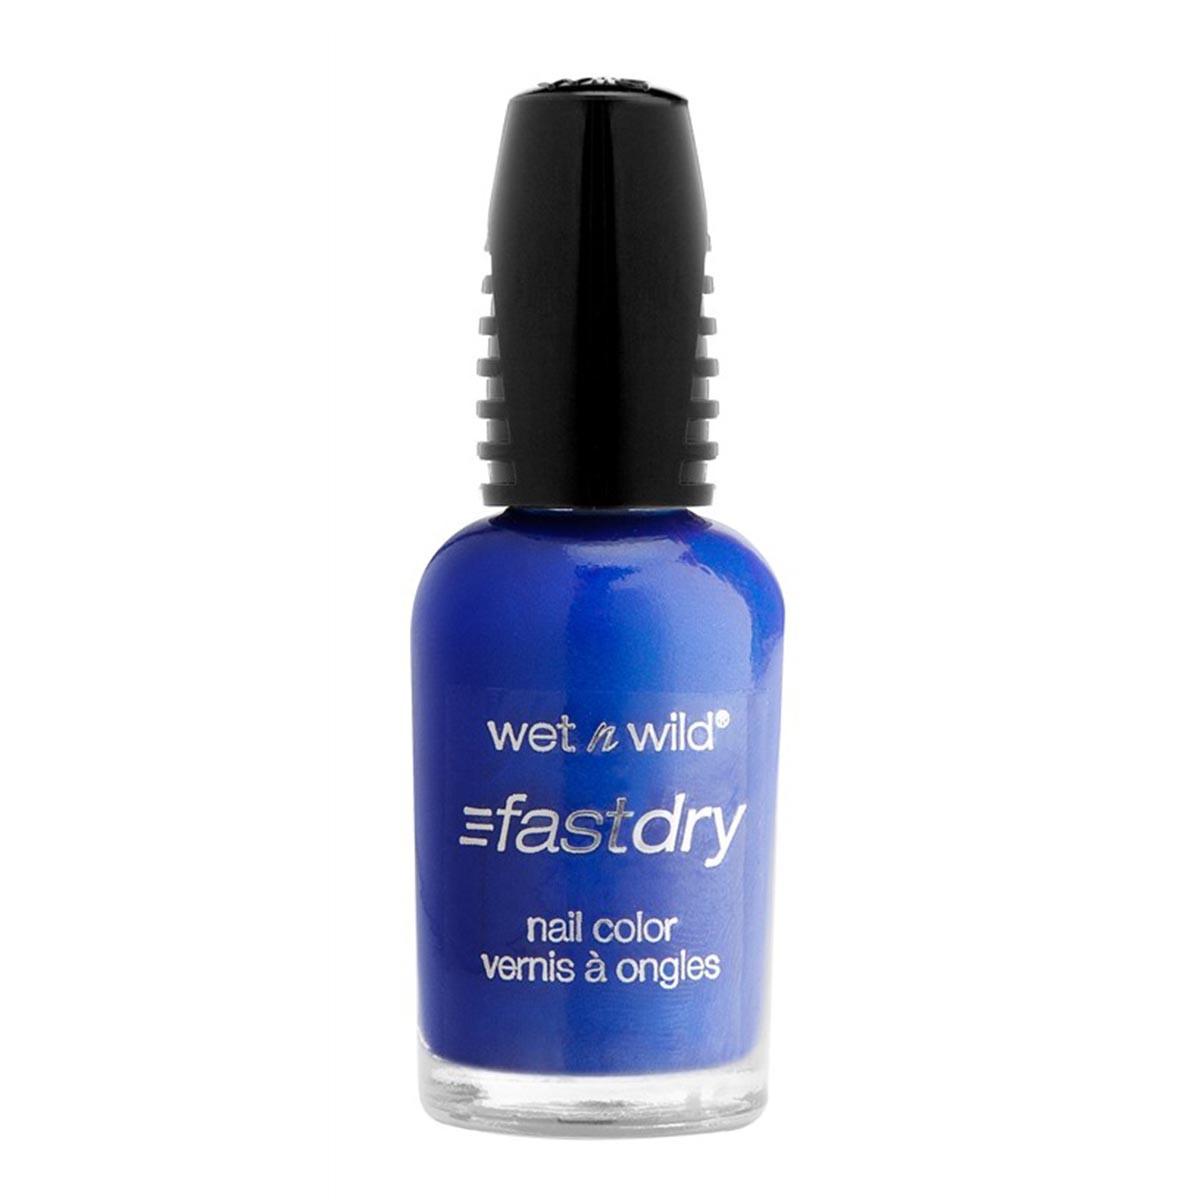 wet-n-wild-fastfry-nail-a-color-saved-by-the-blue